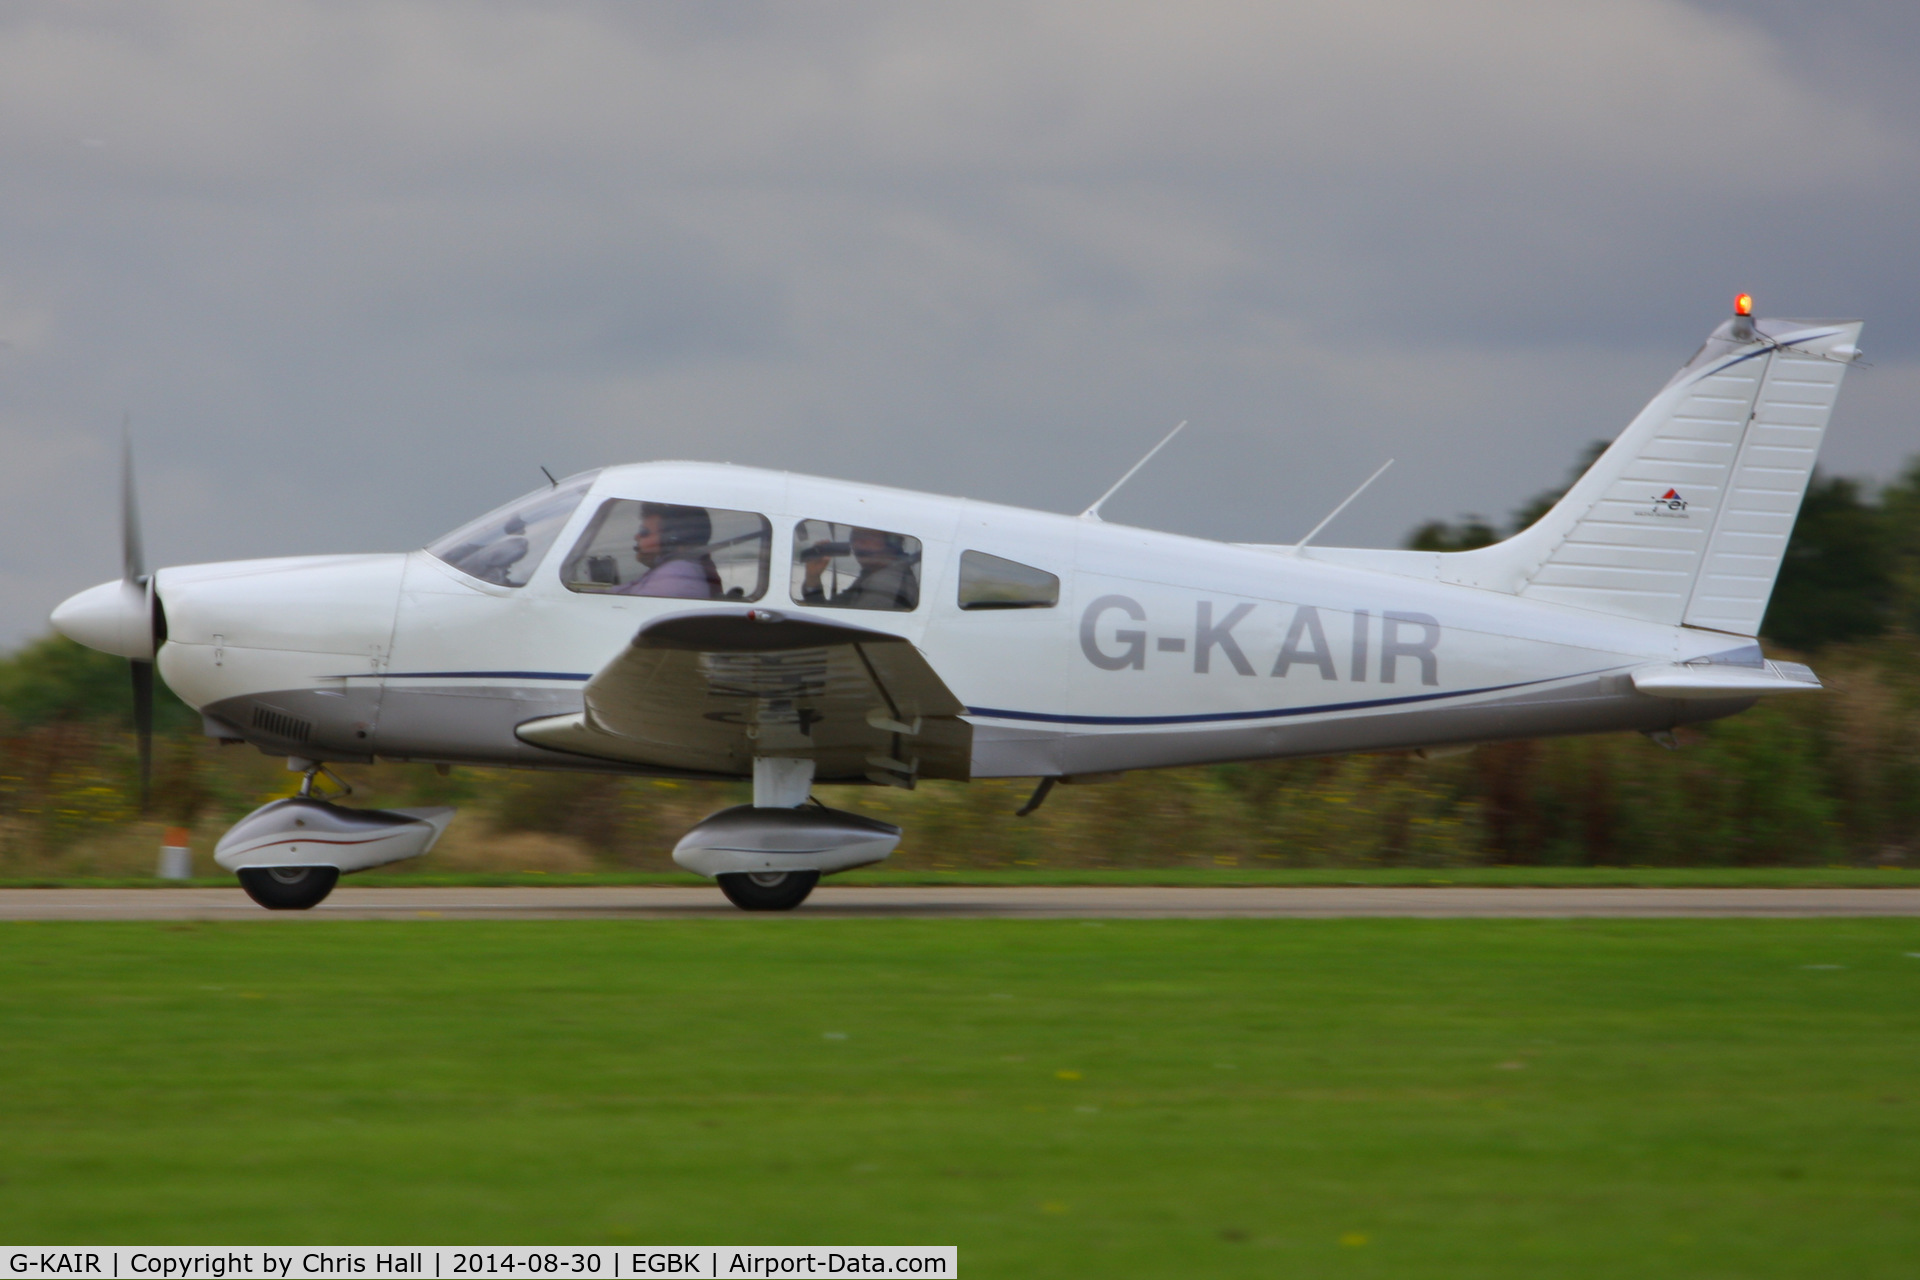 G-KAIR, 1978 Piper PA-28-181 Cherokee Archer II C/N 28-7990176, at the LAA Rally 2014, Sywell